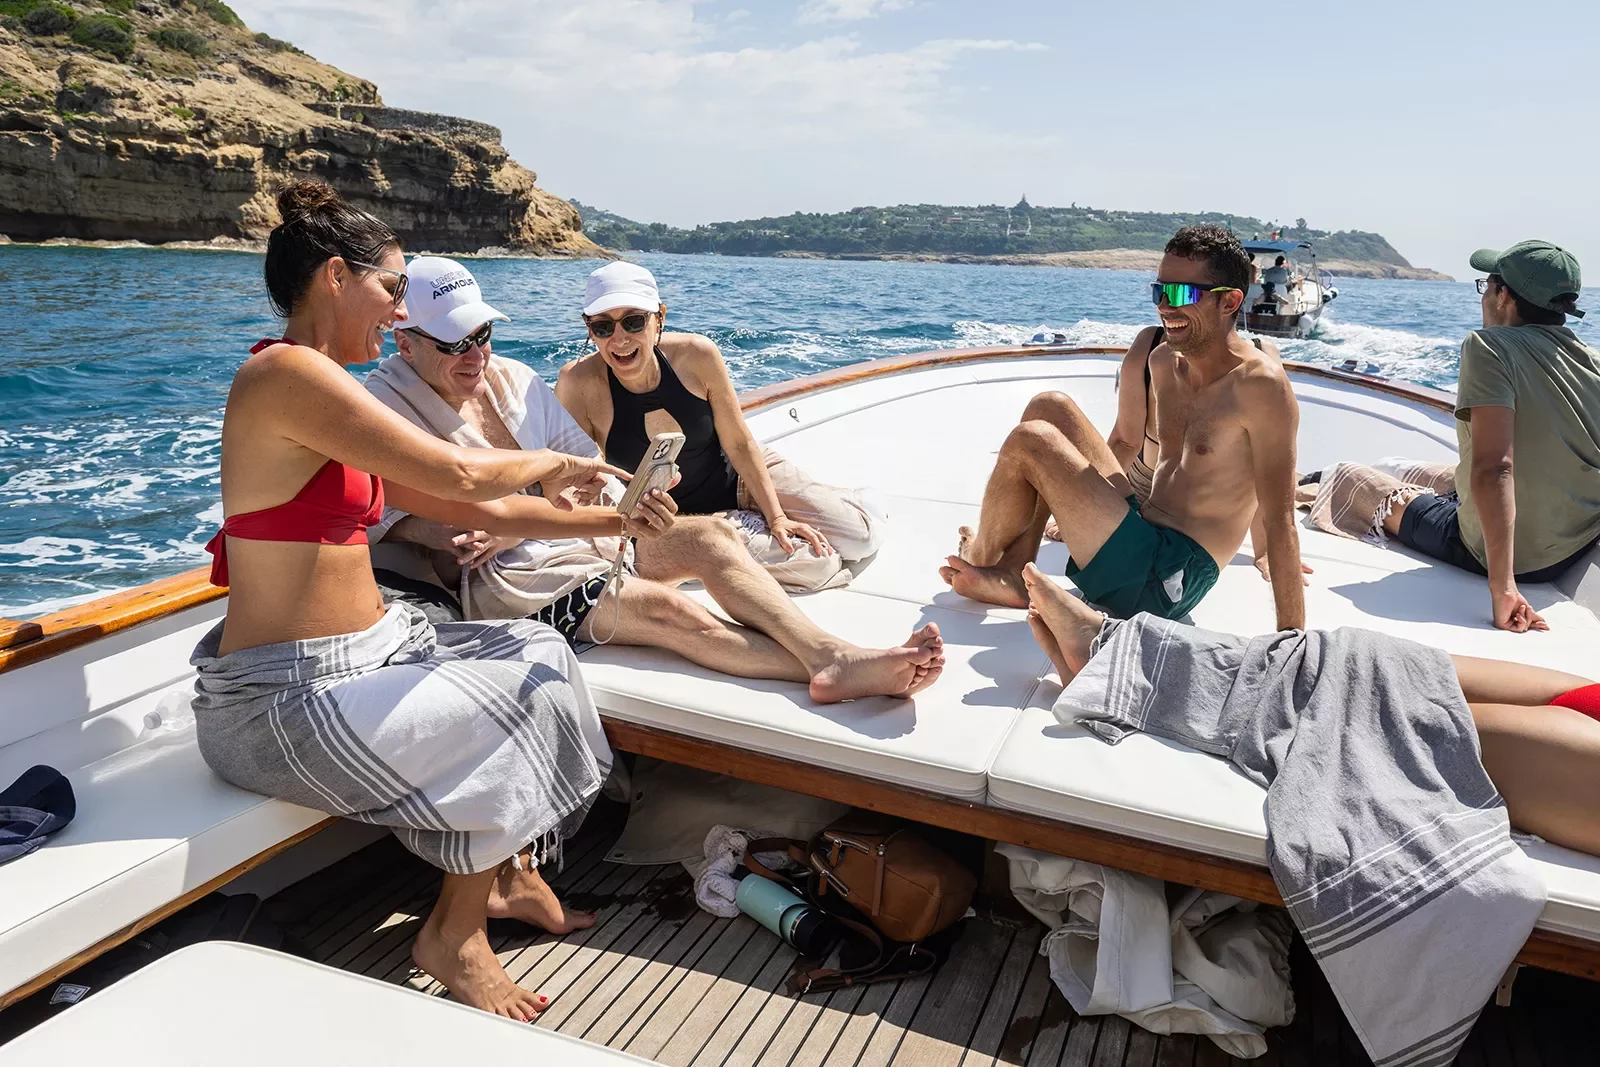 Six guests on boat, three looking at one of their phones.